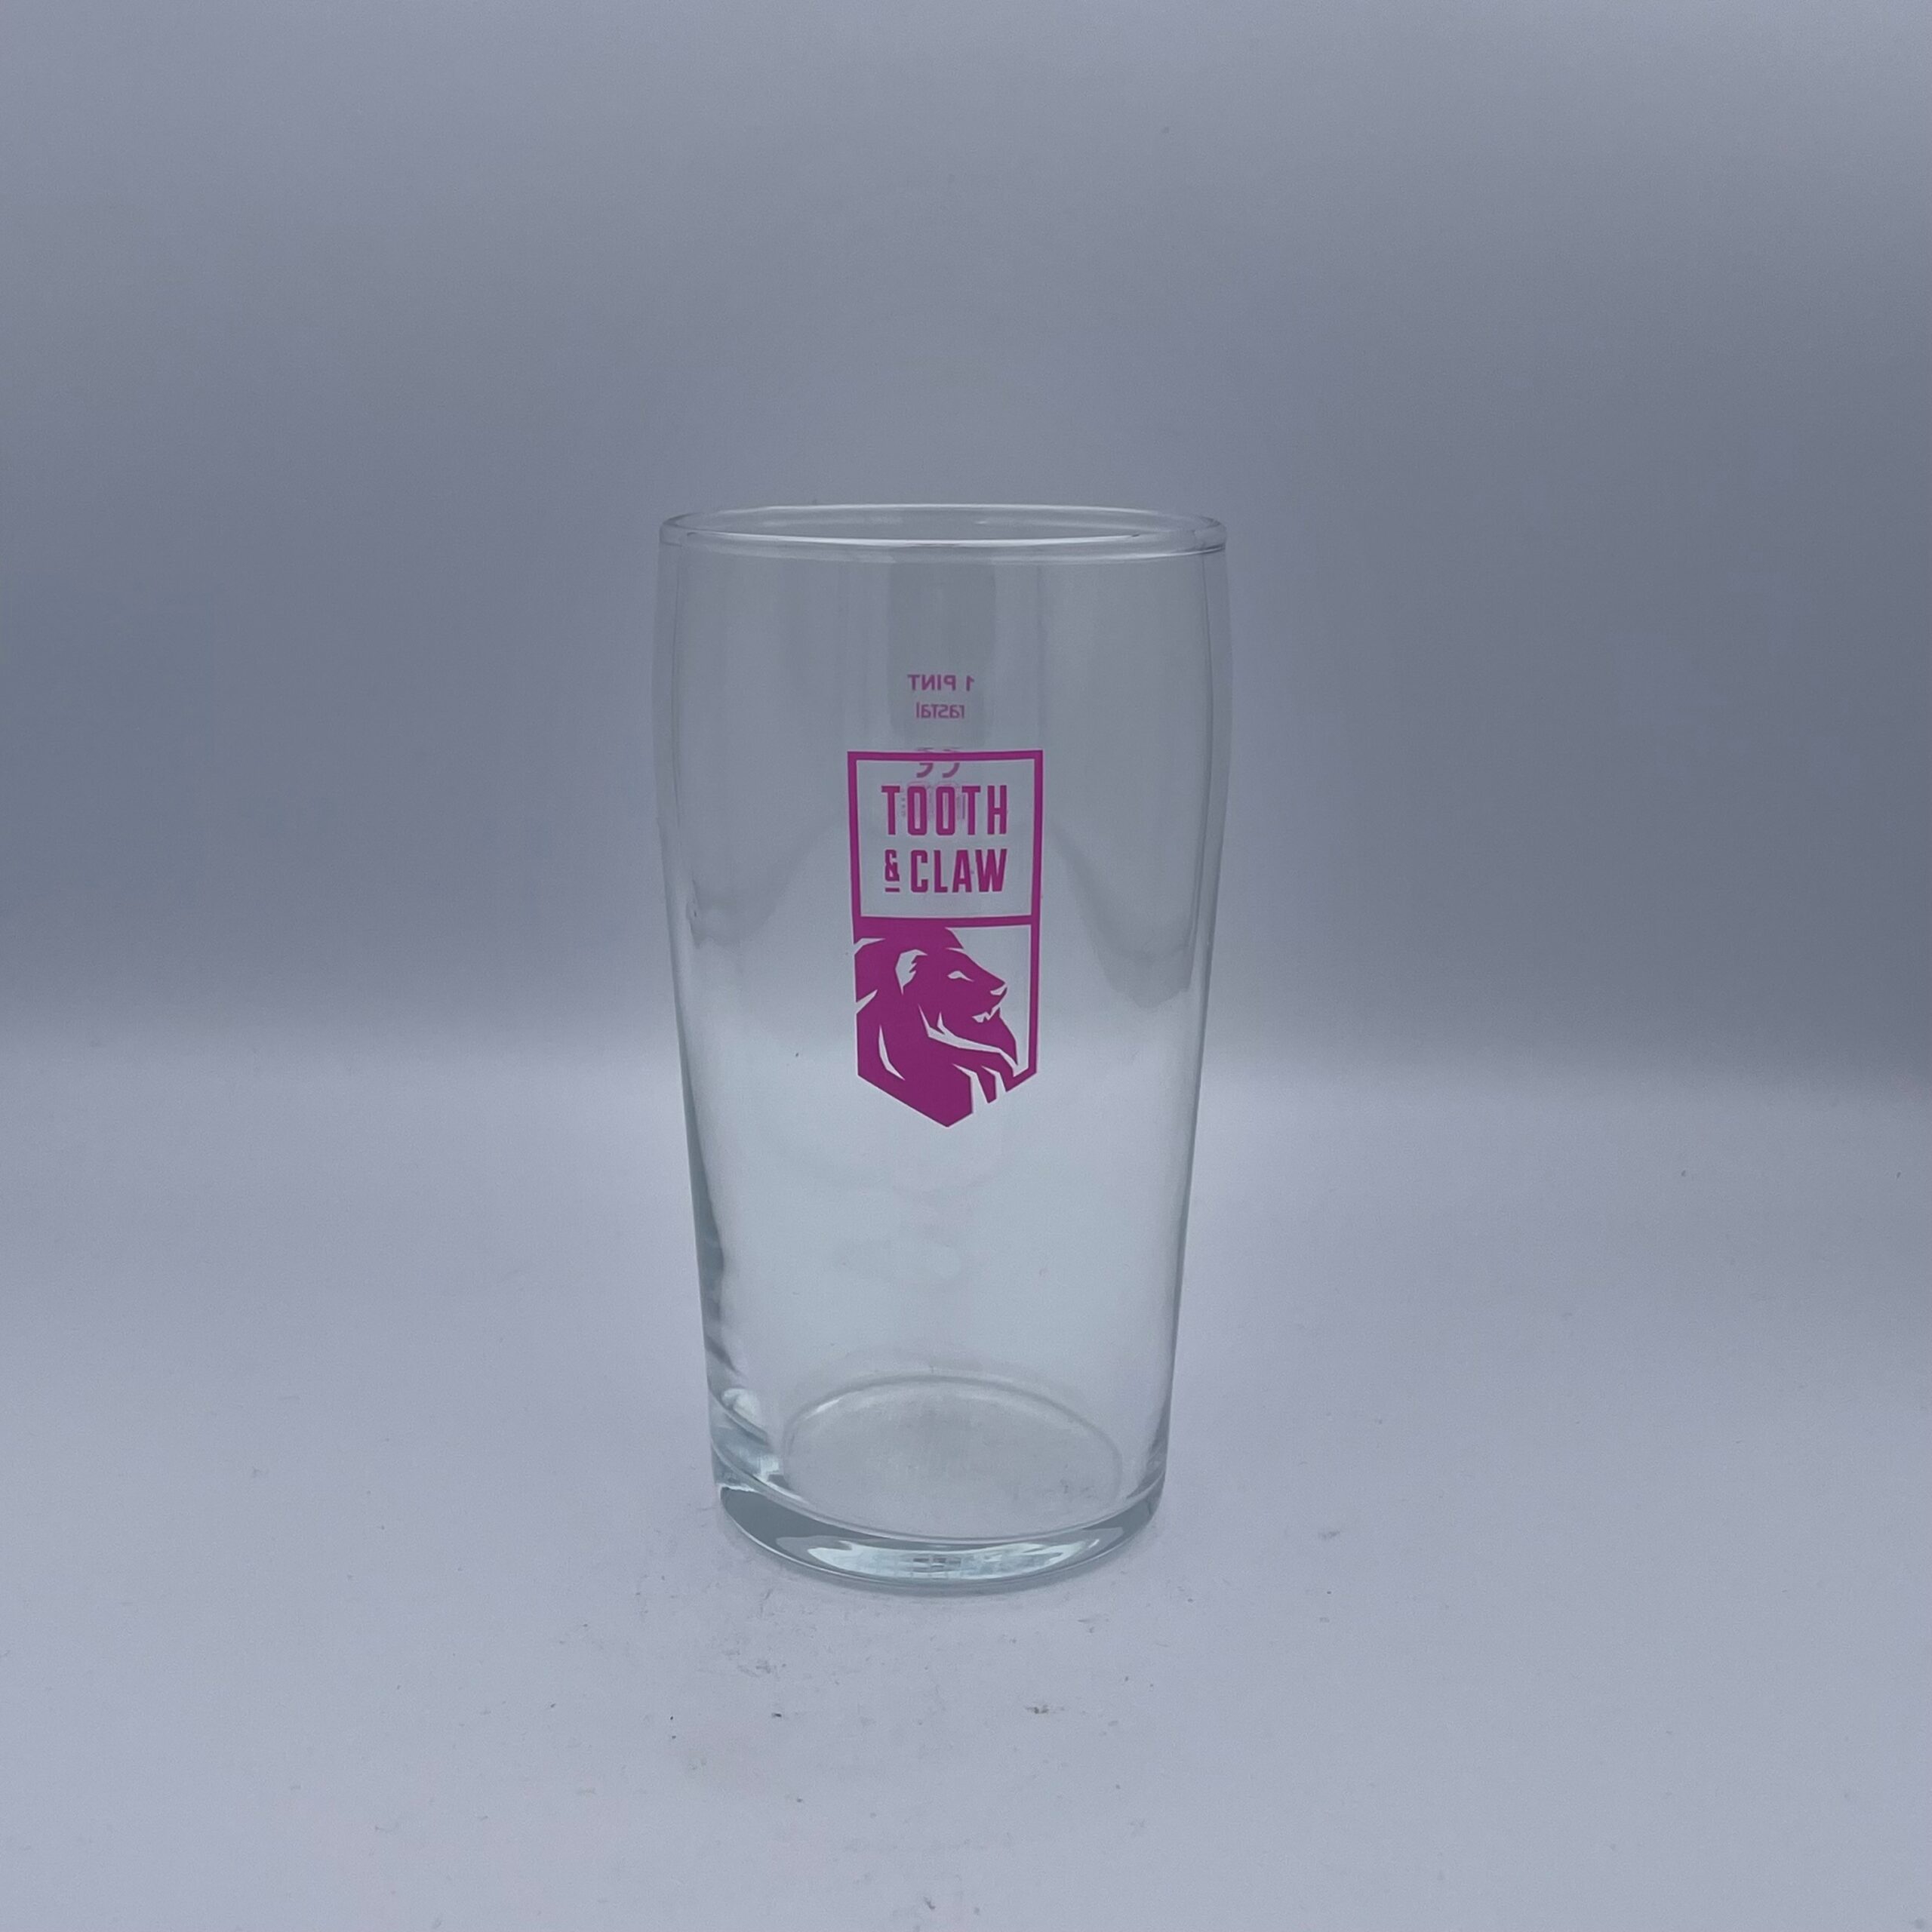 Tooth & Claw 1 Pint Glass